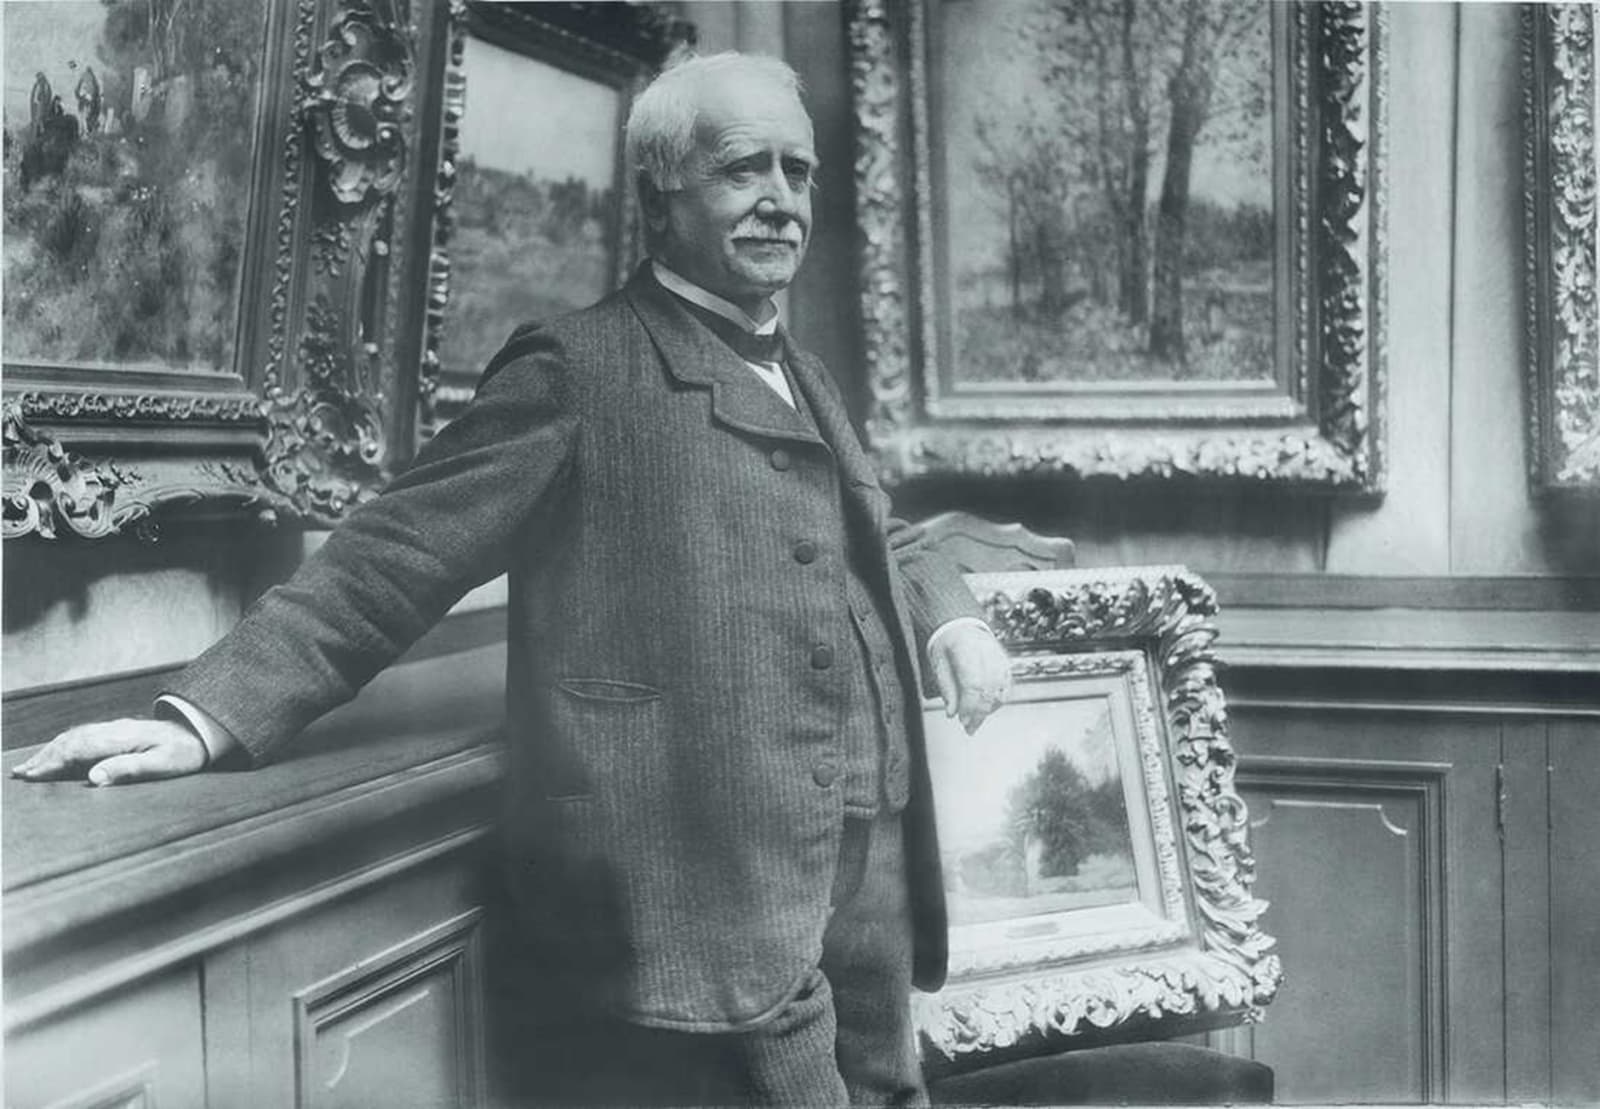 Paul Durand Ruel in his gallery, 1910